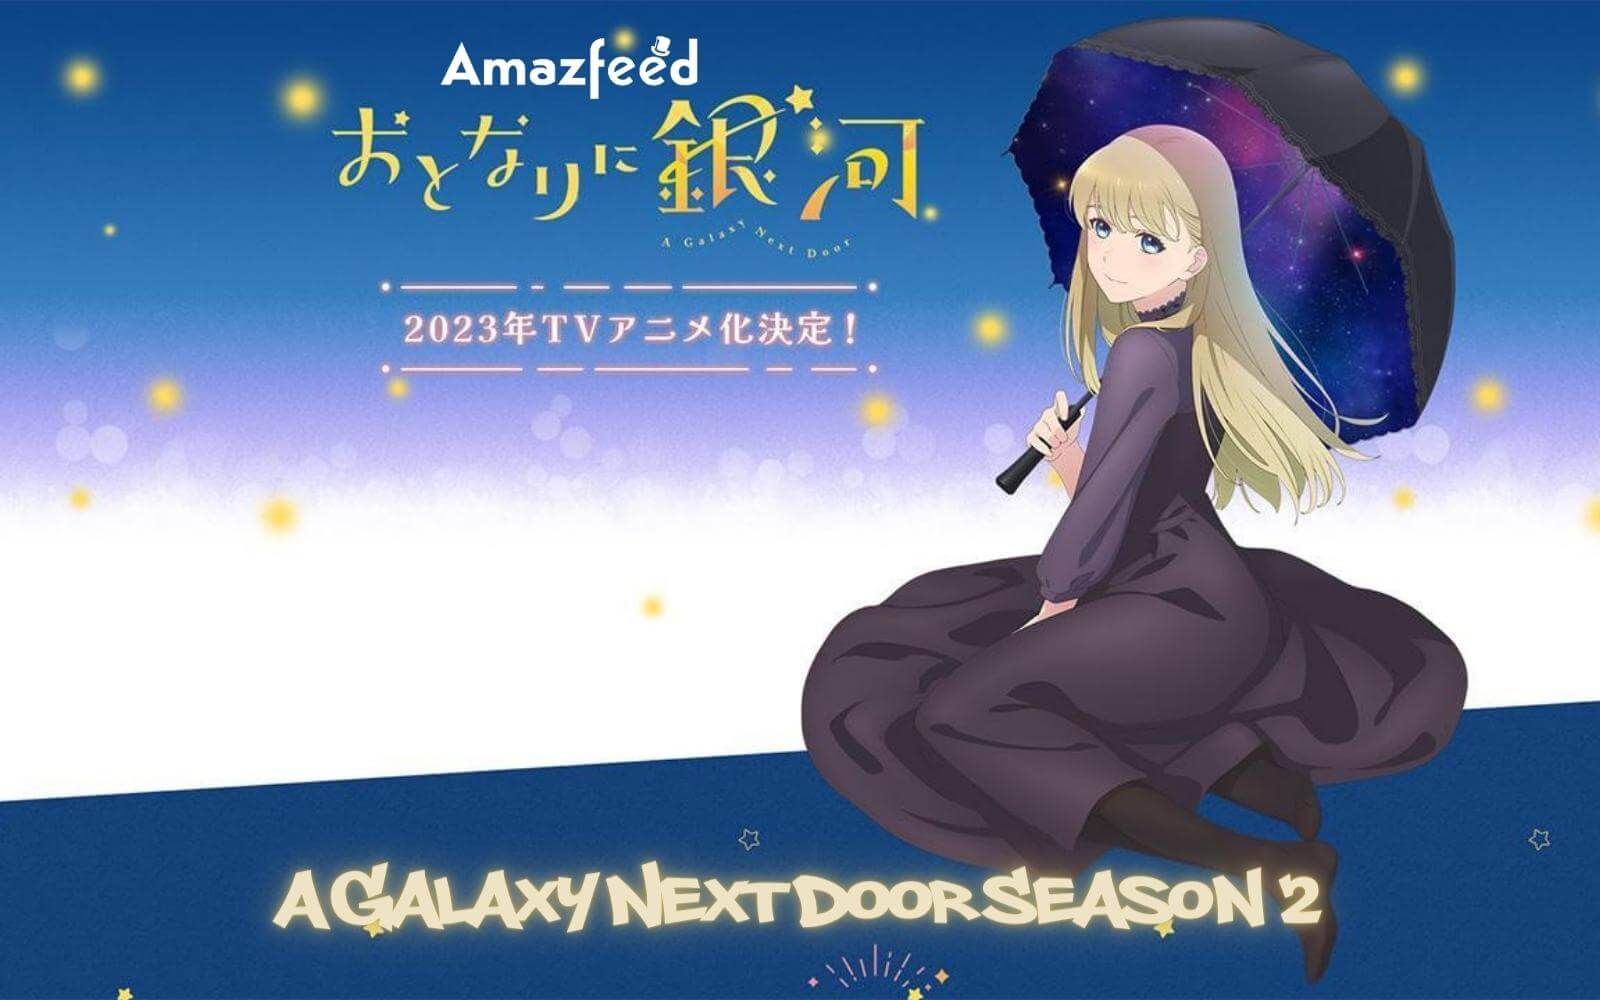 A Galaxy Next Door Season 2: Release Date, Plot, and More in 2023